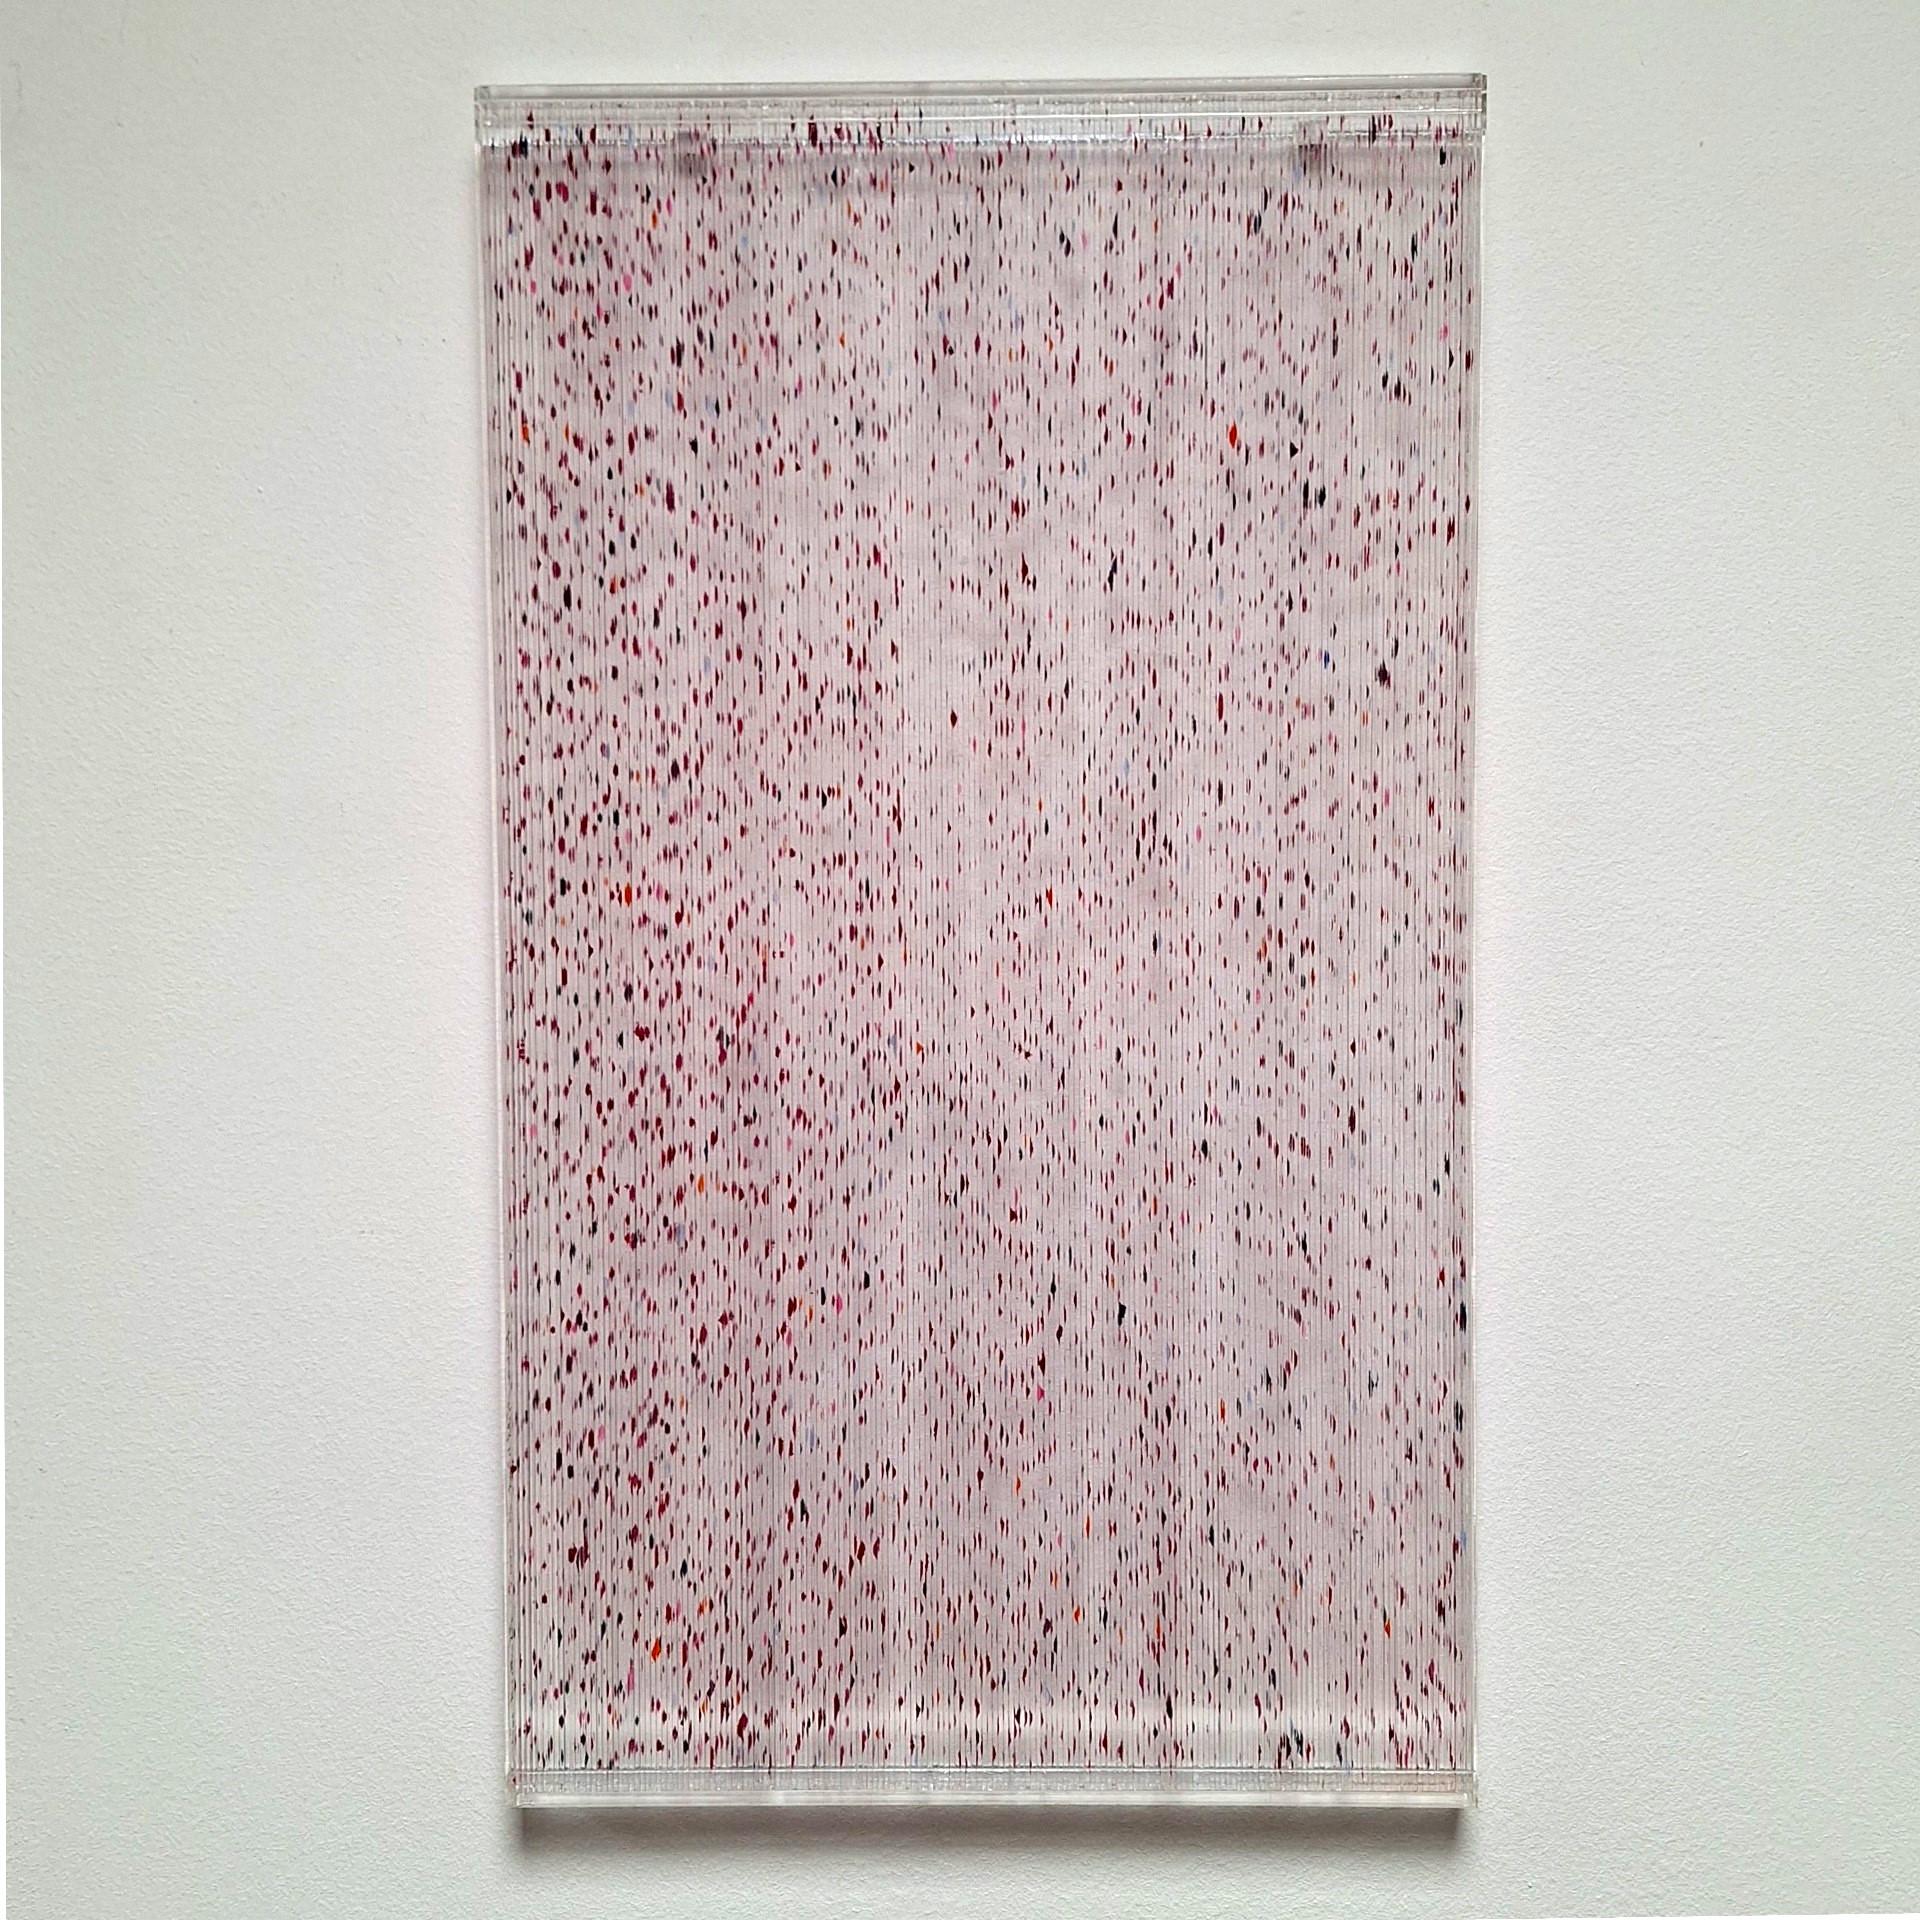 Farbenlichthaut no. 140 is a contemporary modern organic sculpture painting relief by German artist Freddie Michael Soethout. The relief is made from a few hundred of hand-cut two millimeter thick glass strips covered with a dotted organic pattern